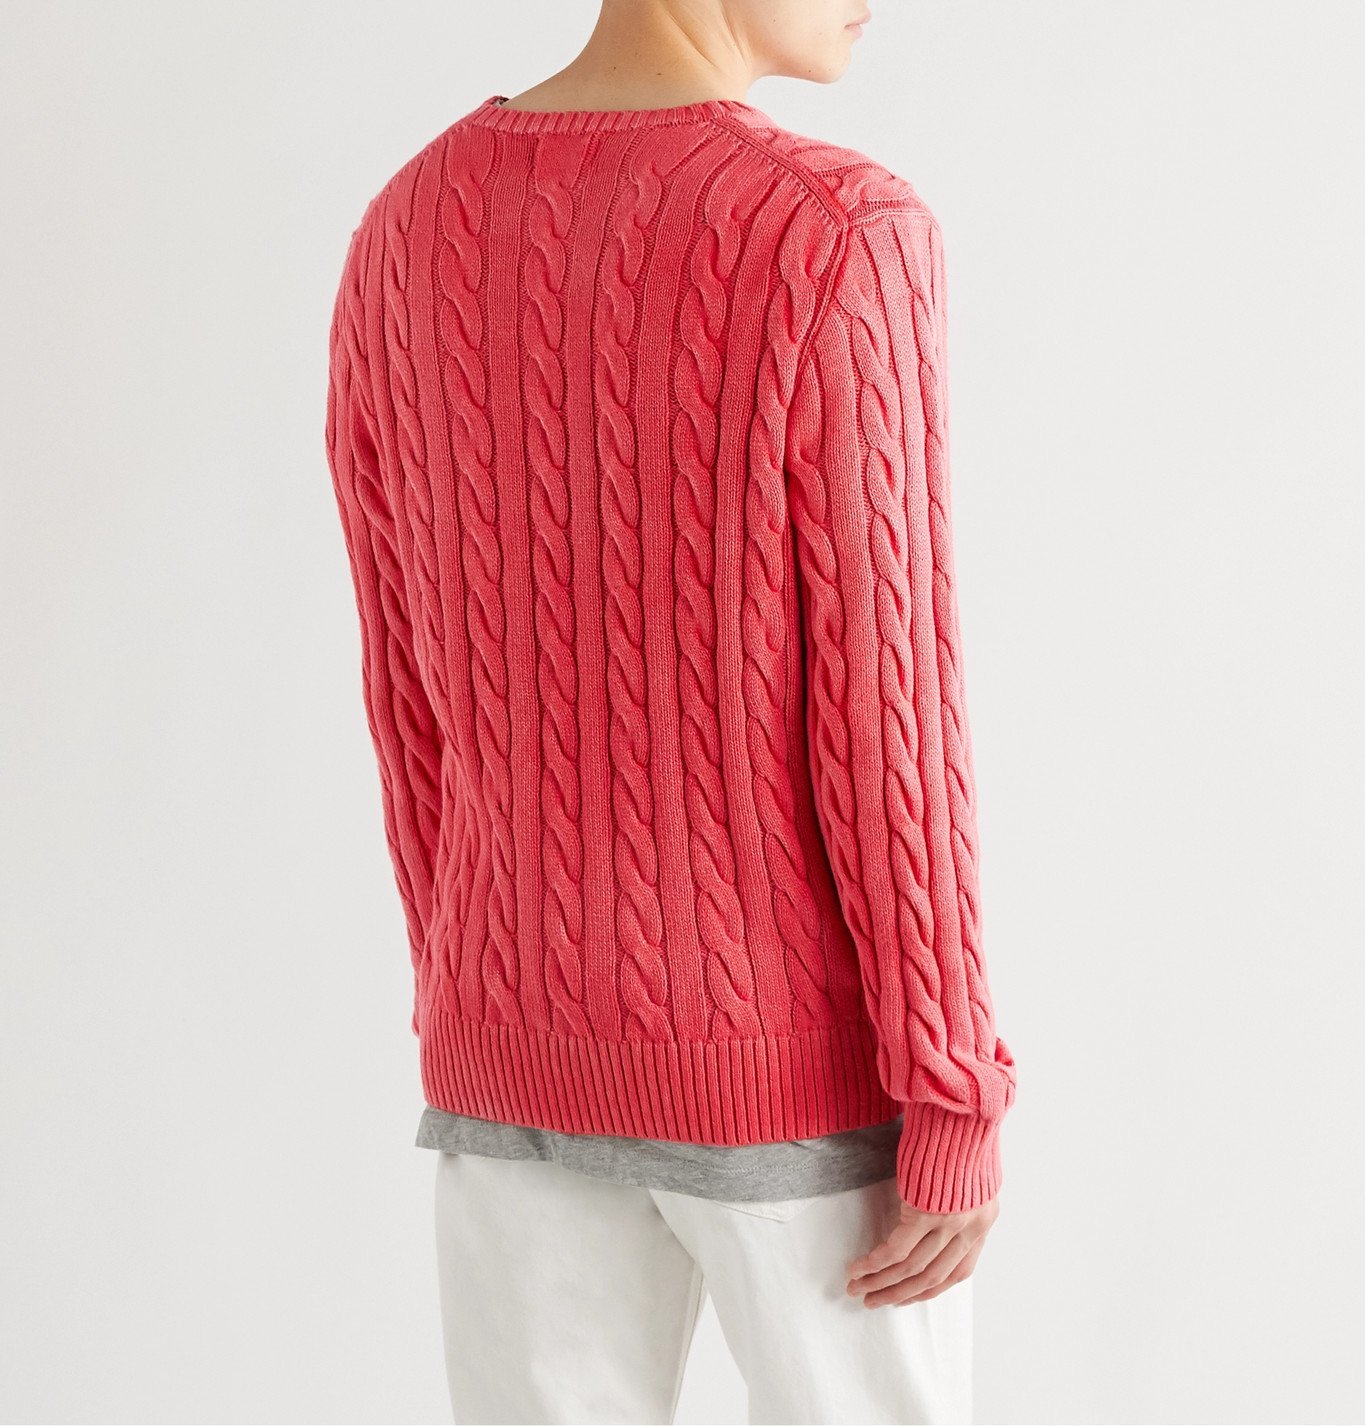 Polo Ralph Lauren - Cable-Knit Cotton Sweater - Red Polo Ralph Lauren